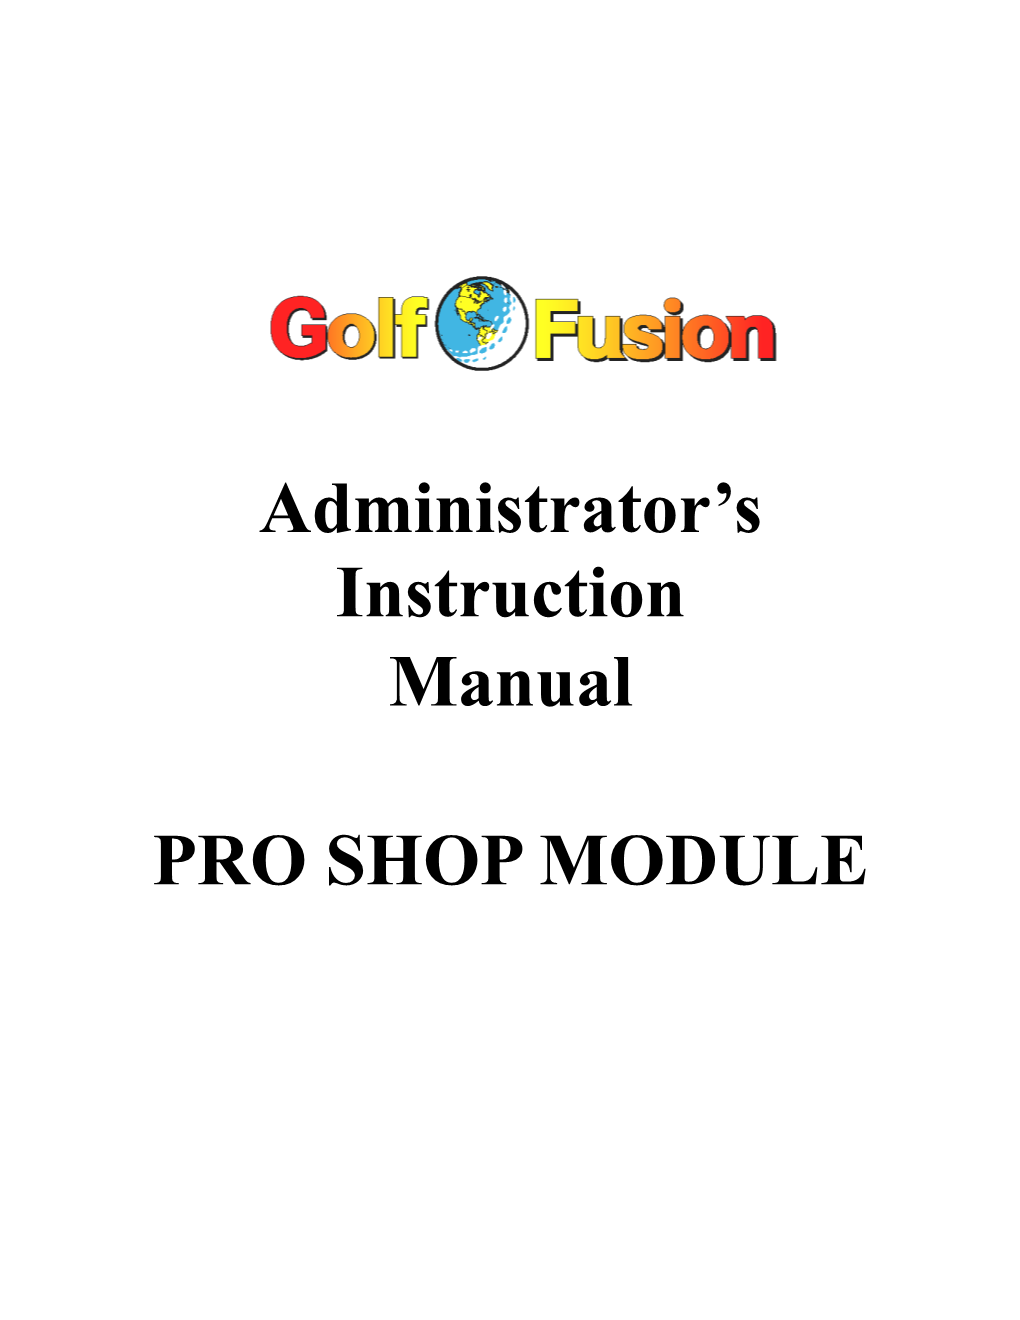 Golf Fusion Administrative Instructions